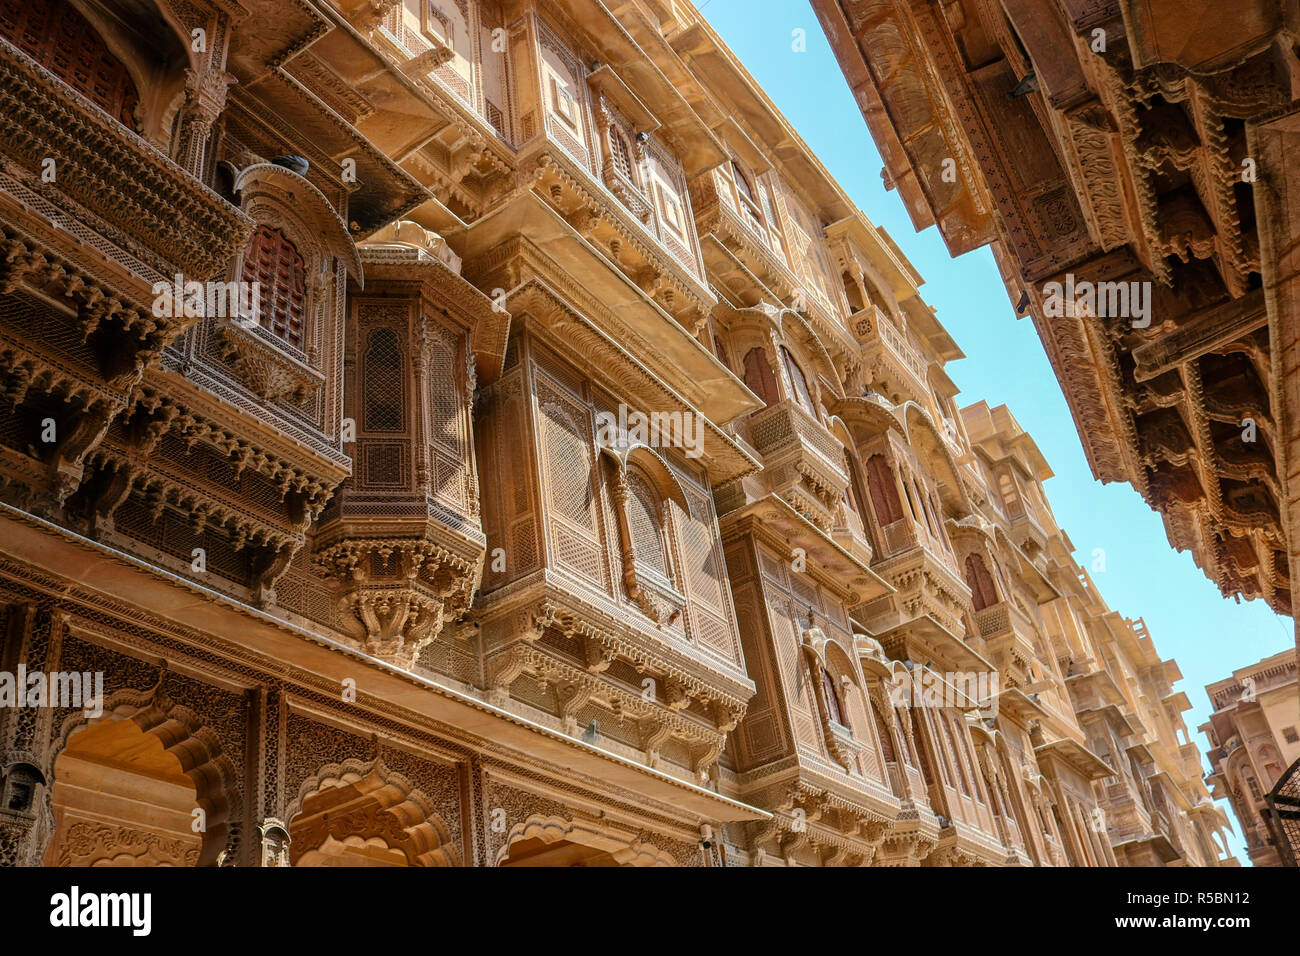 Patwon Ki Haveli, Jaisalmer, Rajasthan, India. The first among these havelis was commissioned and constructed in the year 1805 by Guman Chand Patwa an Stock Photo